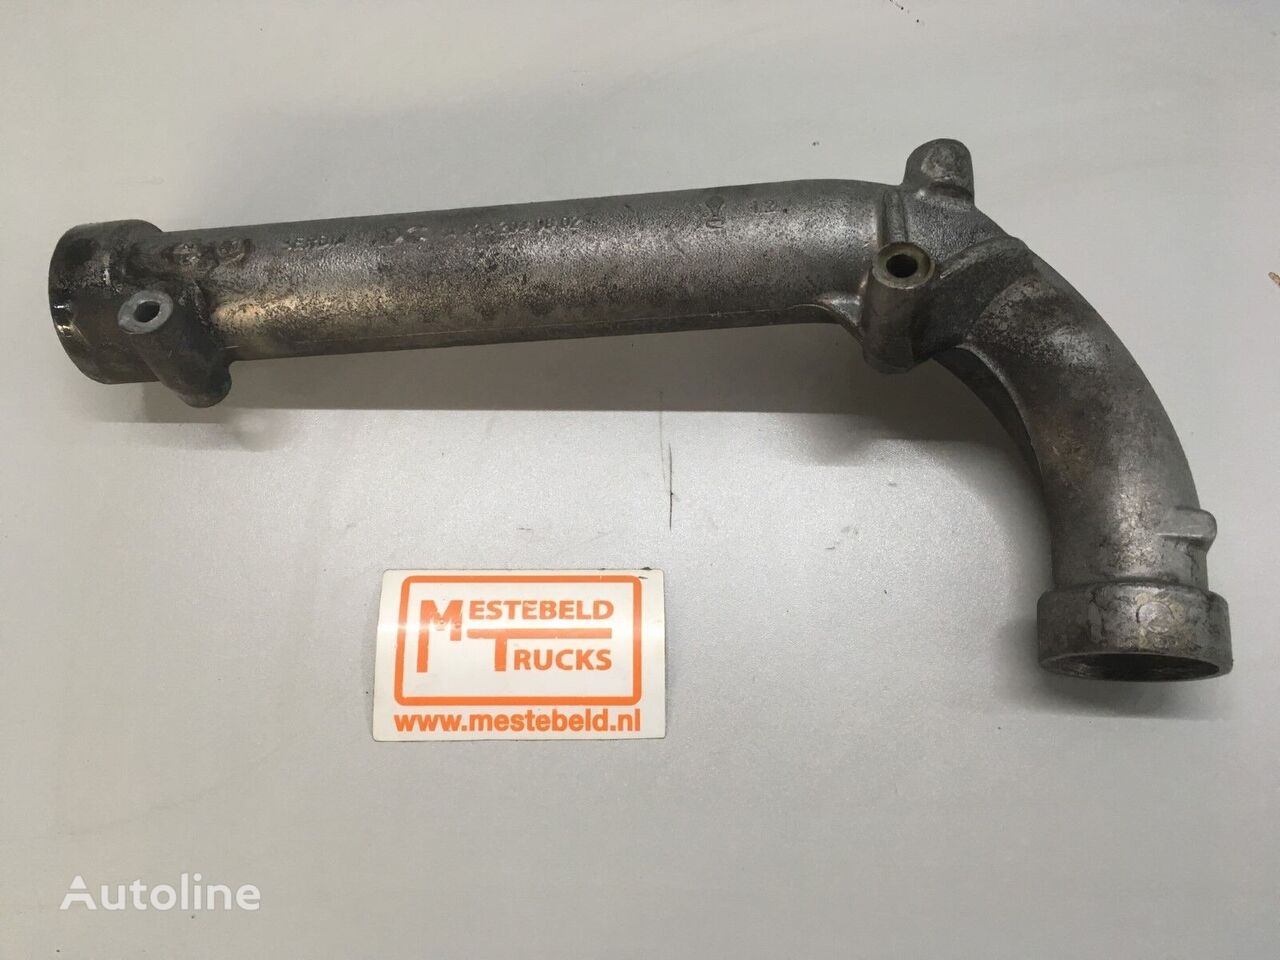 Mercedes-Benz KOELWATERBUIS OM 471 LA cooling pipe for truck